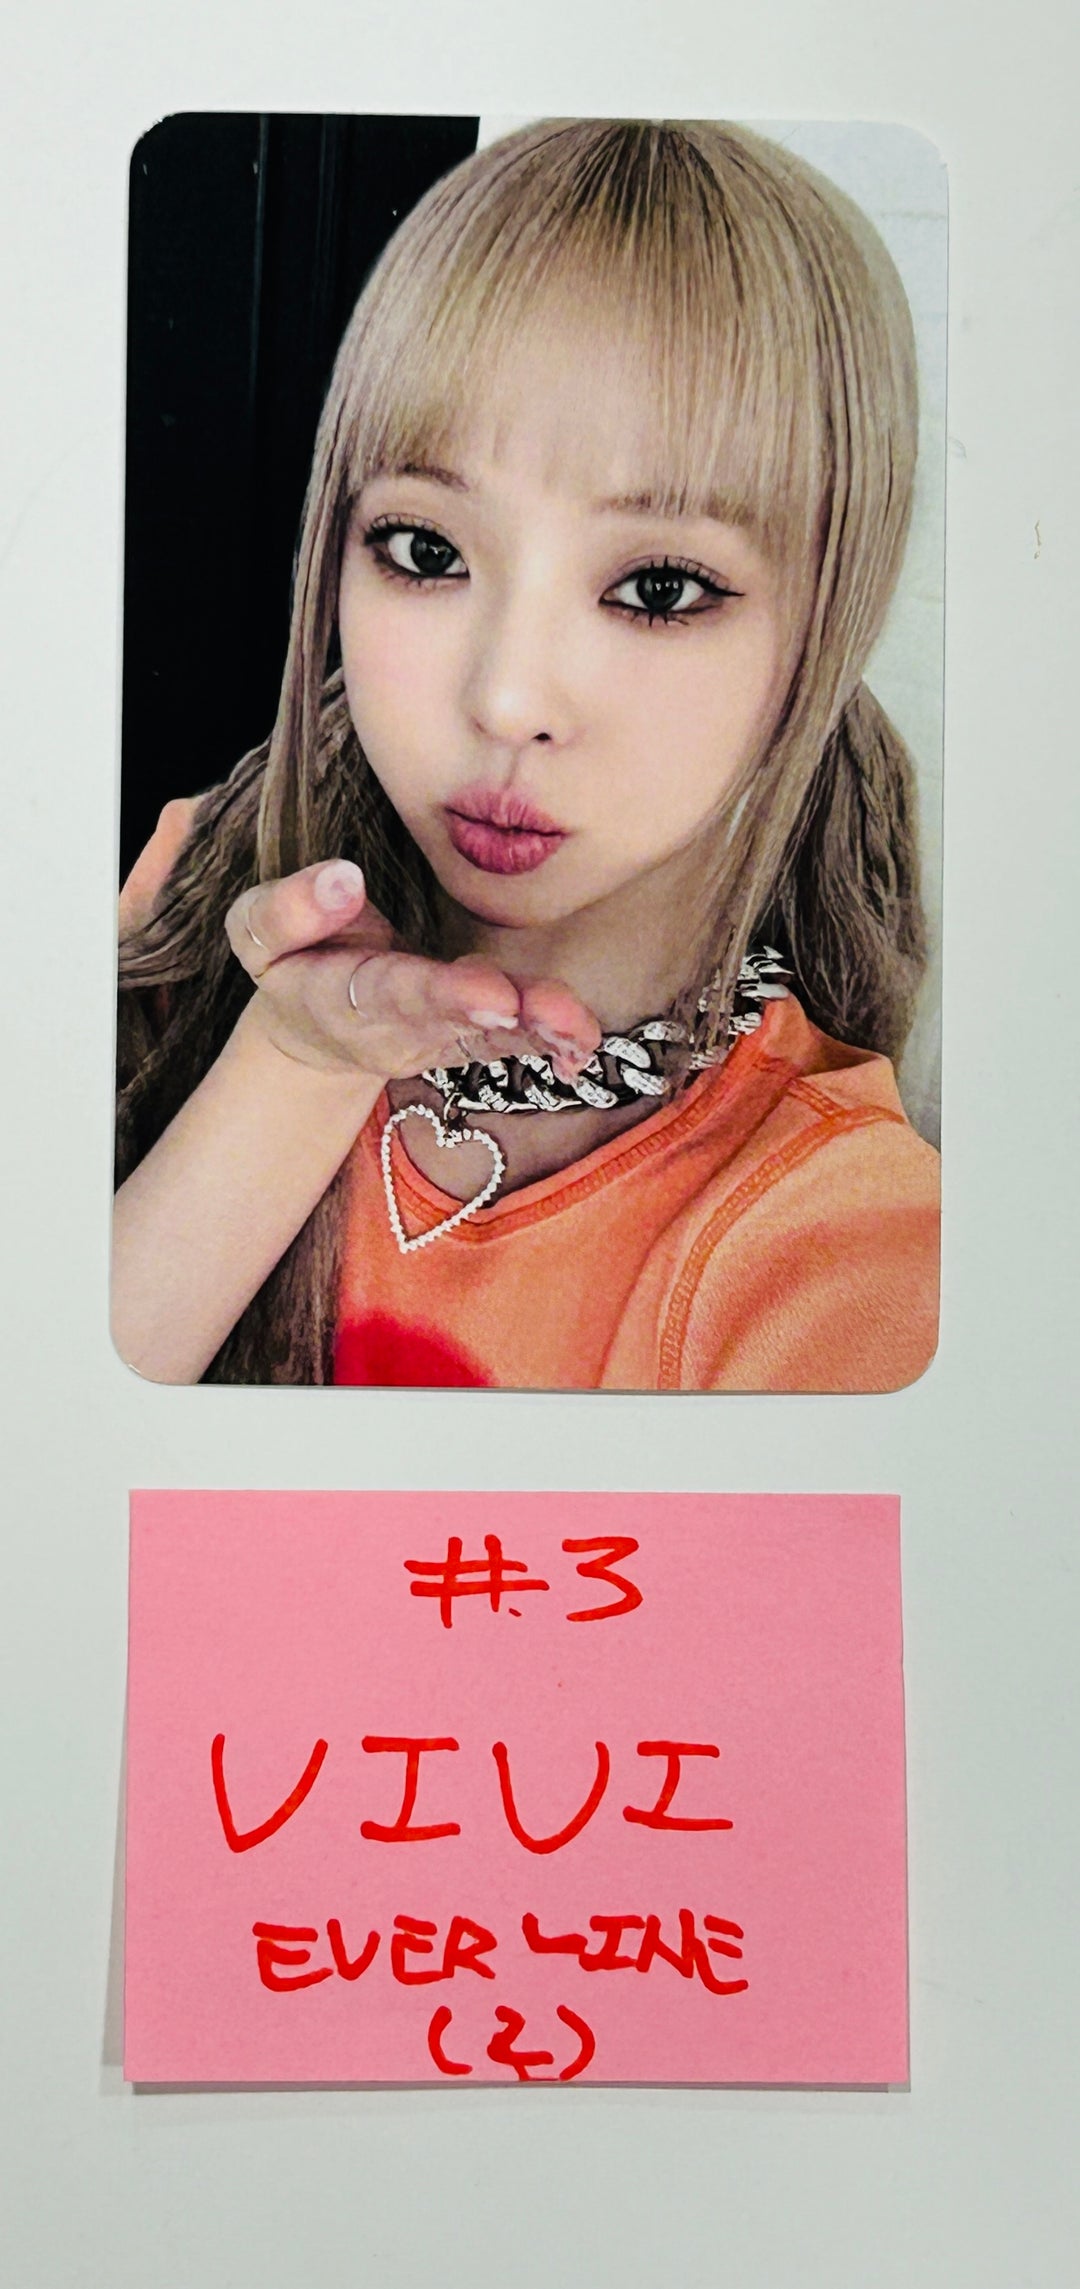 Loossemble "One of a Kind" - Everline Pre-Order Benefit Photocard [Ever Music Ver.] [24.5.10]